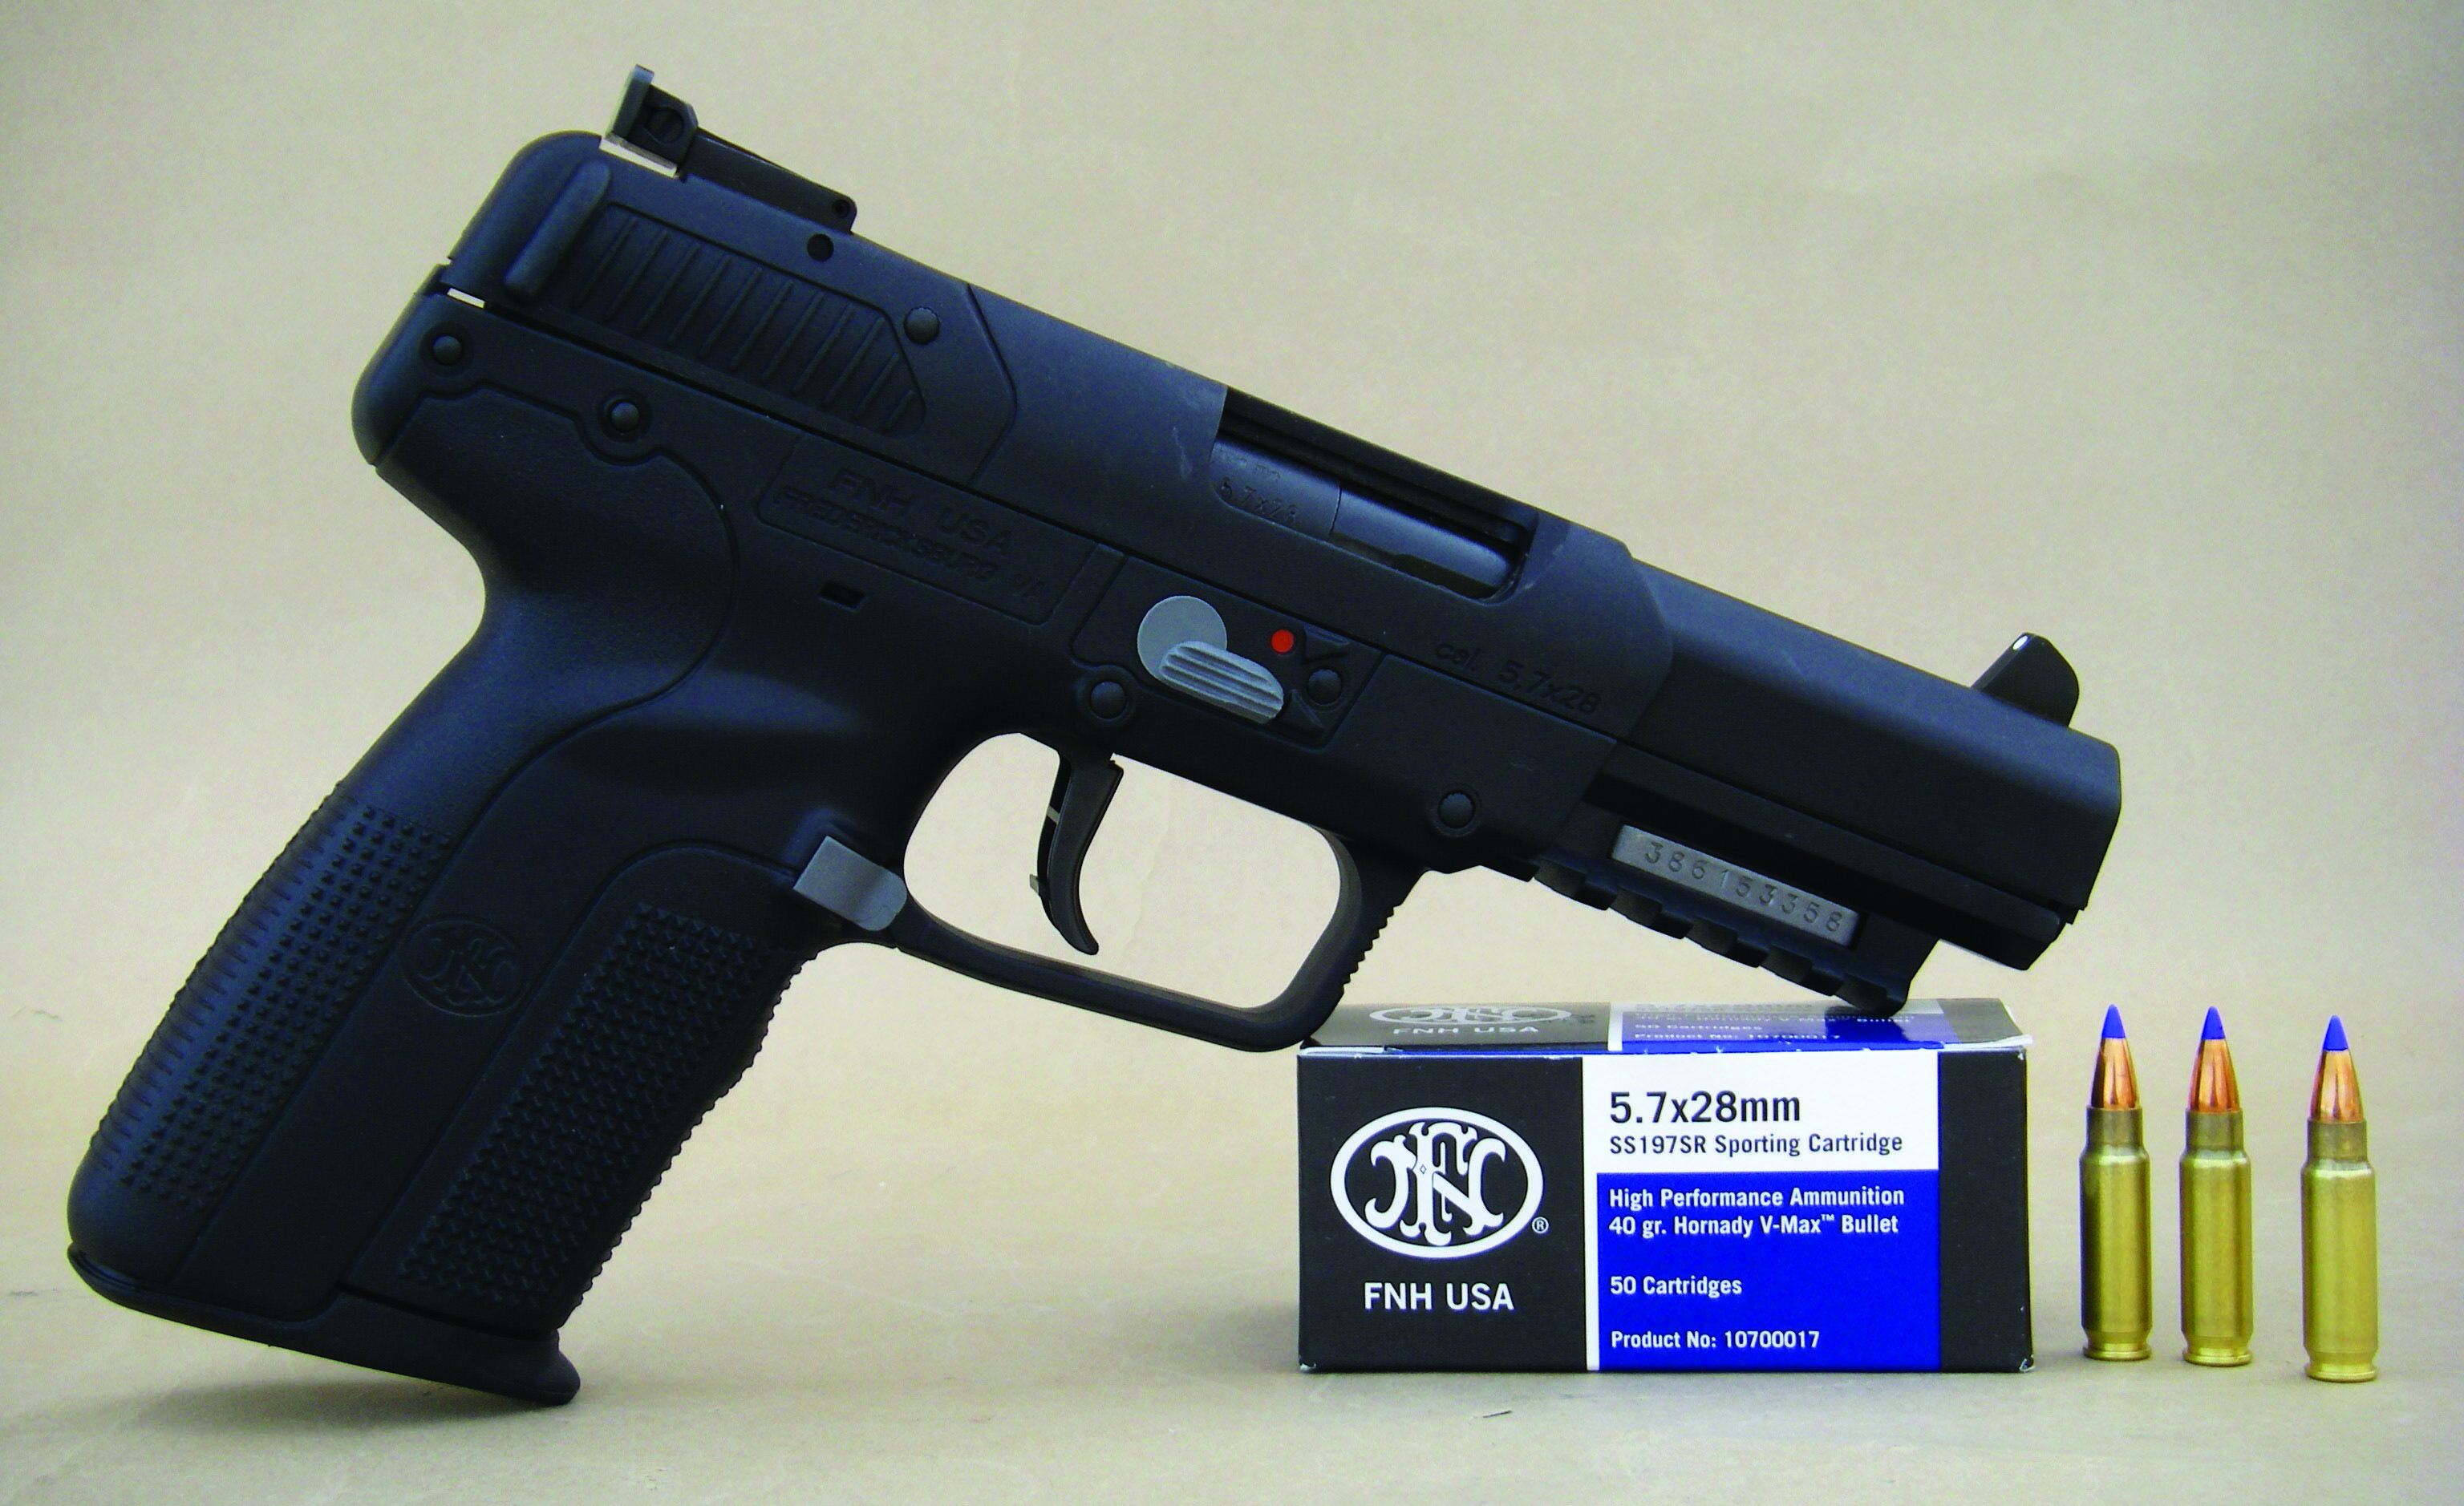 The 5.7x28mm cartridge is housed in this FN-manufactured Model Five-Seven USG autoloading pistol.